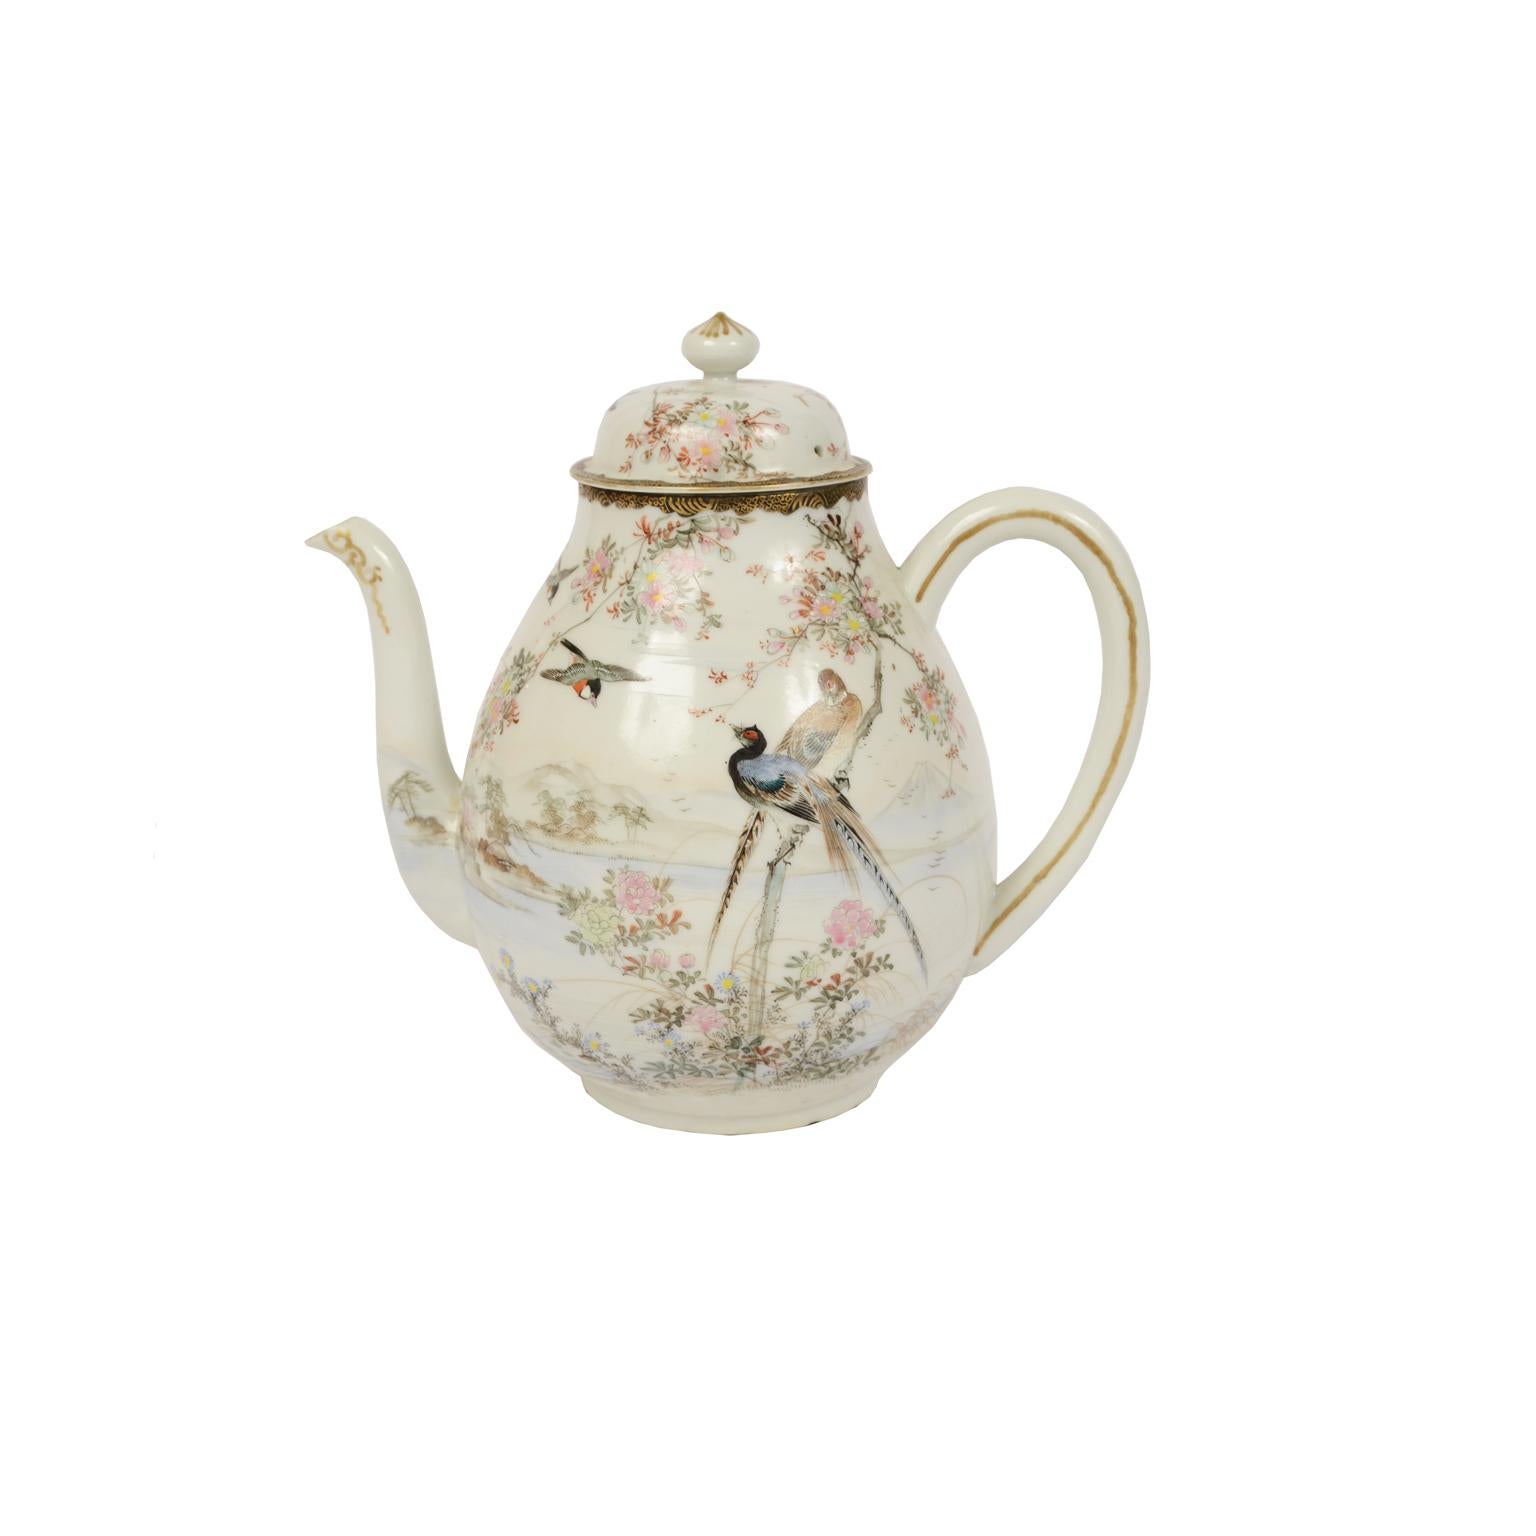 Polychrome hand-decorated porcelain teapot, milk jug and sugar bowl with refined depictions of birds, flowers, and bucolic Japanese landscapes. Good condition, slight chipping in the pouring spout of the teapot, small crack on the handle of the milk